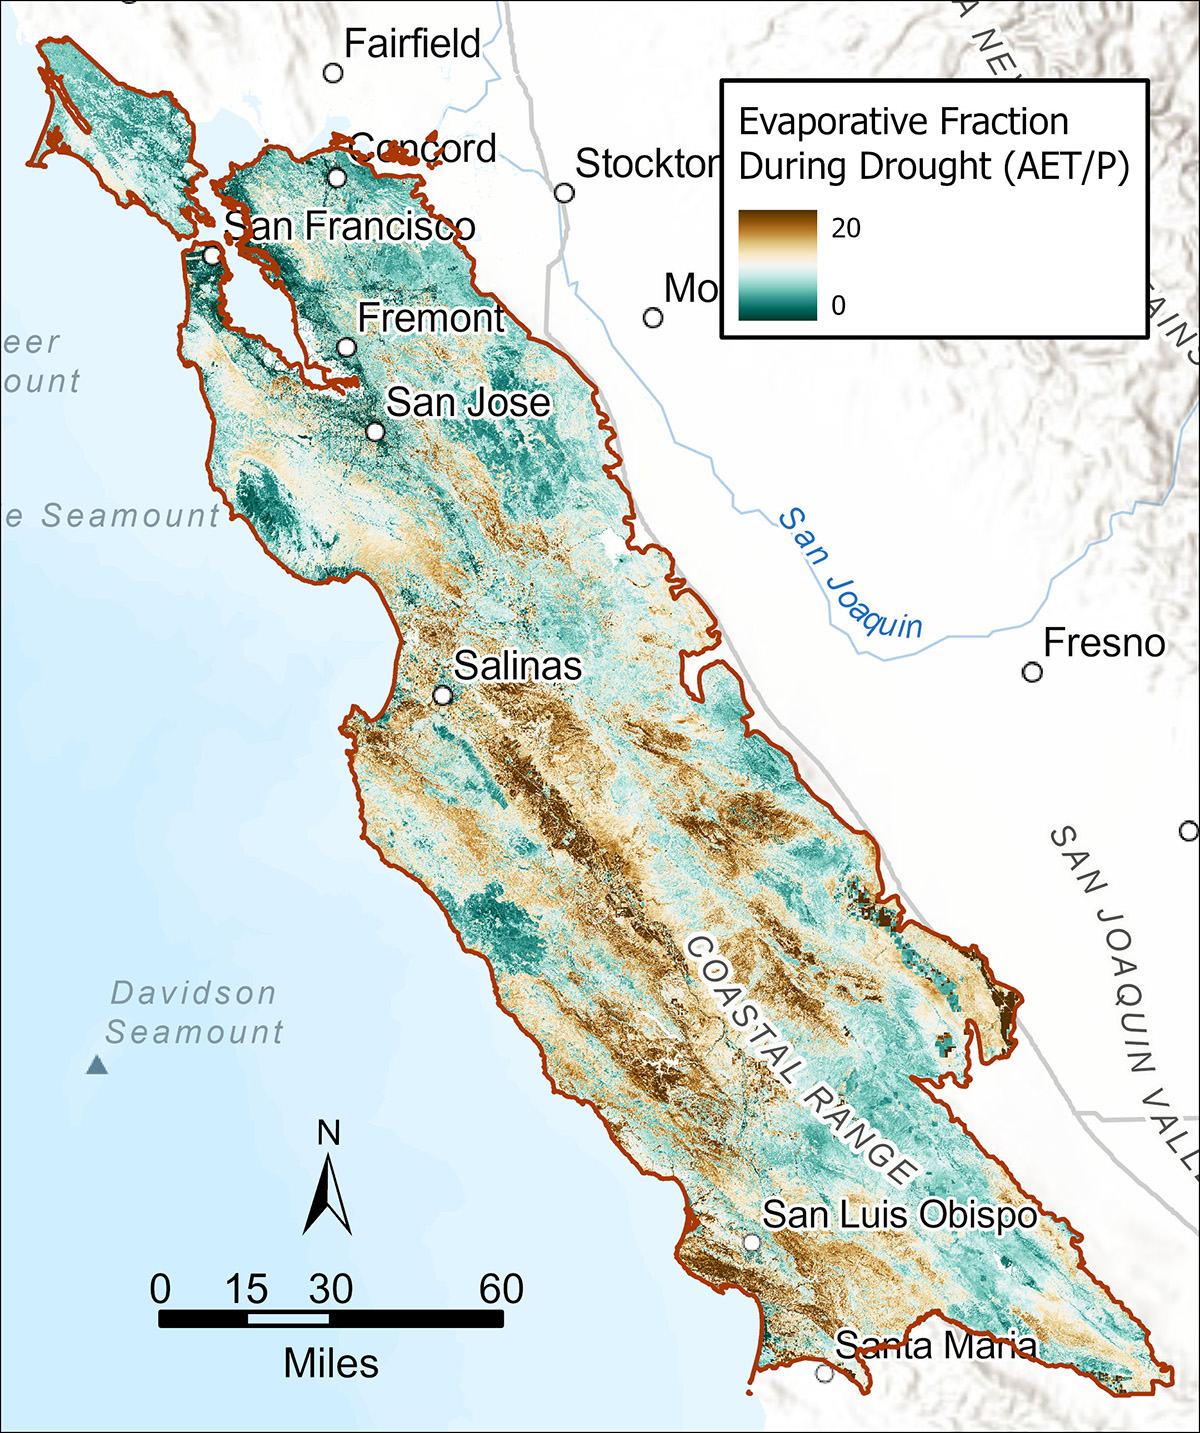 Evaporative Fraction During Drought (AET P) Map